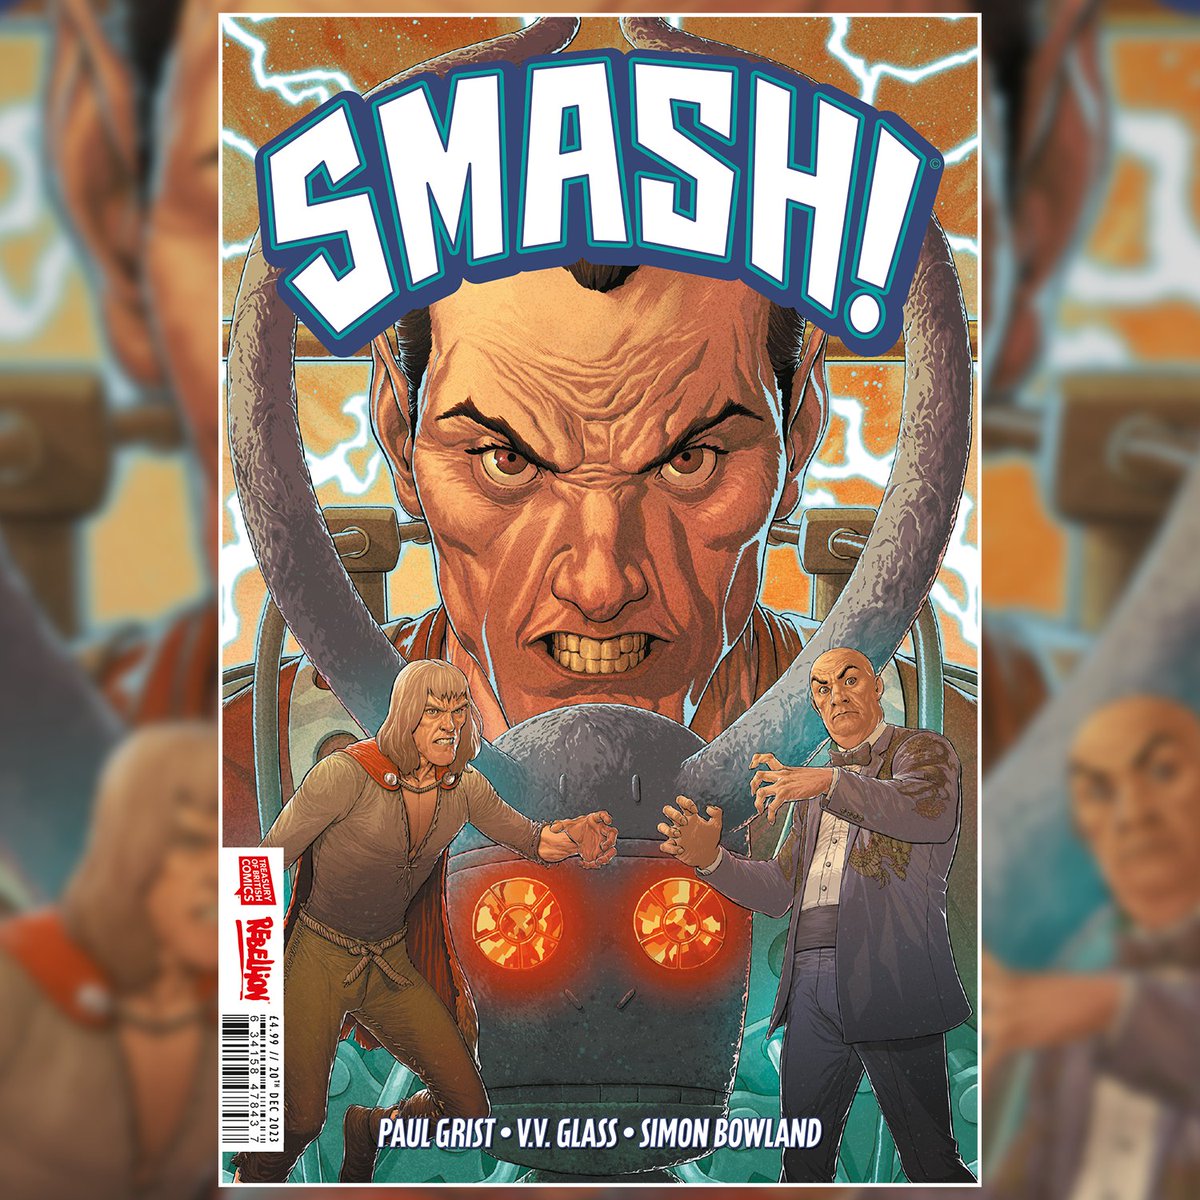 OUT TODAY: the third and final issue of Smash! from the creative team of @mistergrist and @Ana_Dapta! The Spider comes face-to-face with Cursitor Doom and Adam Eterno - but who will have the last laugh? See inside & buy: bit.ly/3RNZVkc